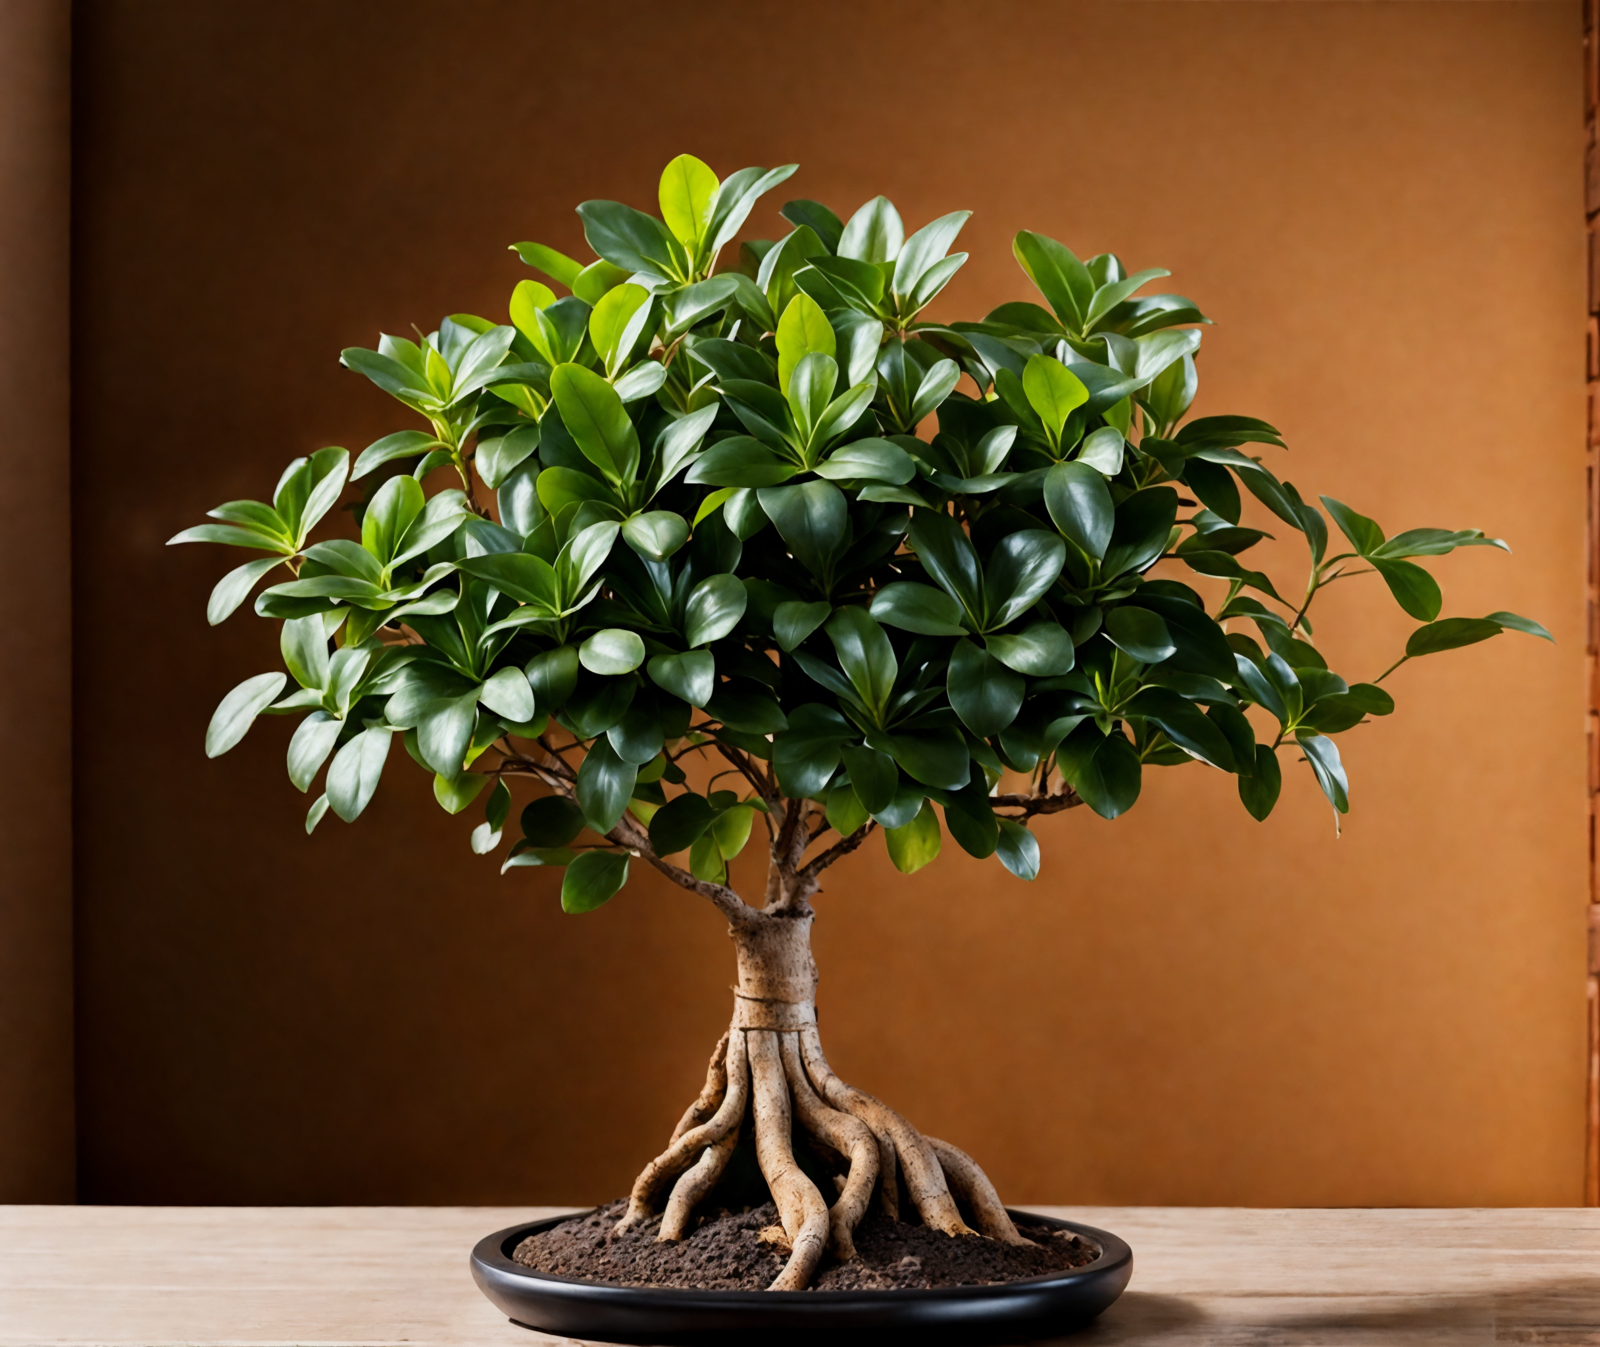 Ficus microcarpa in a bowl planter on a wooden table, with clear lighting and a dark background.